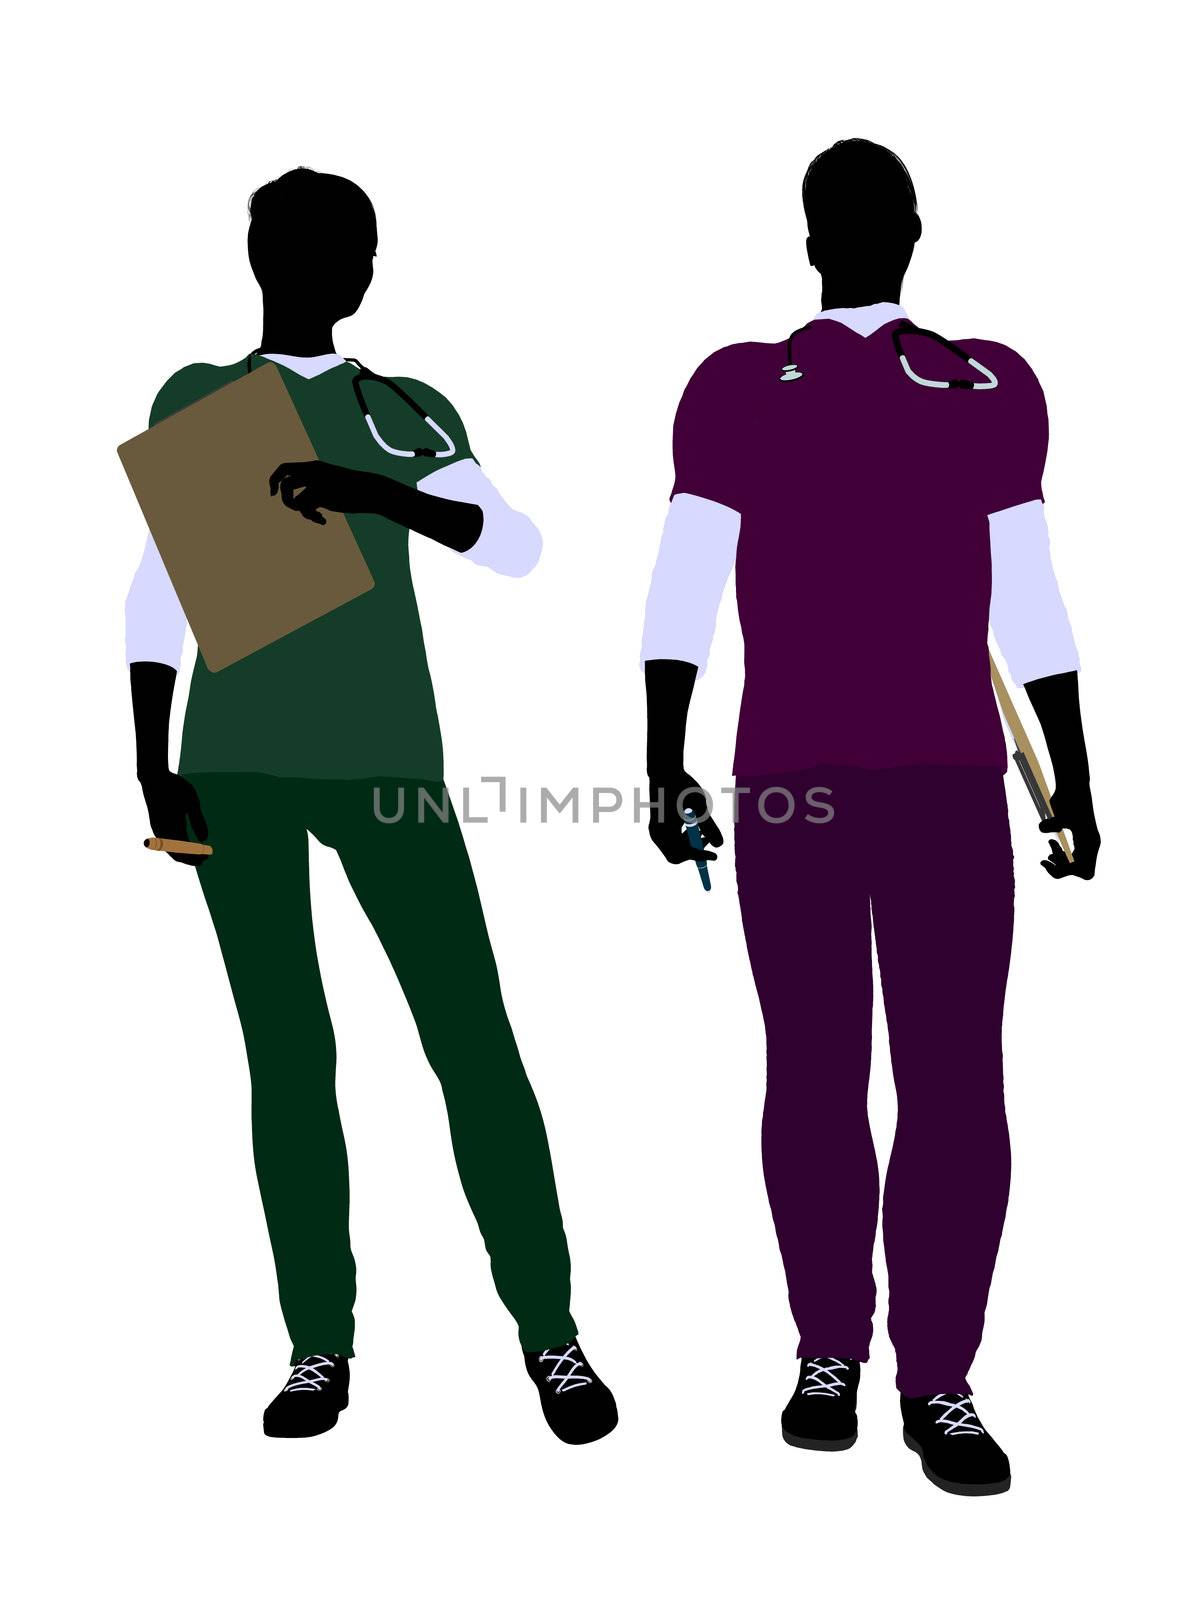 Female and male doctor silhouette on a white background